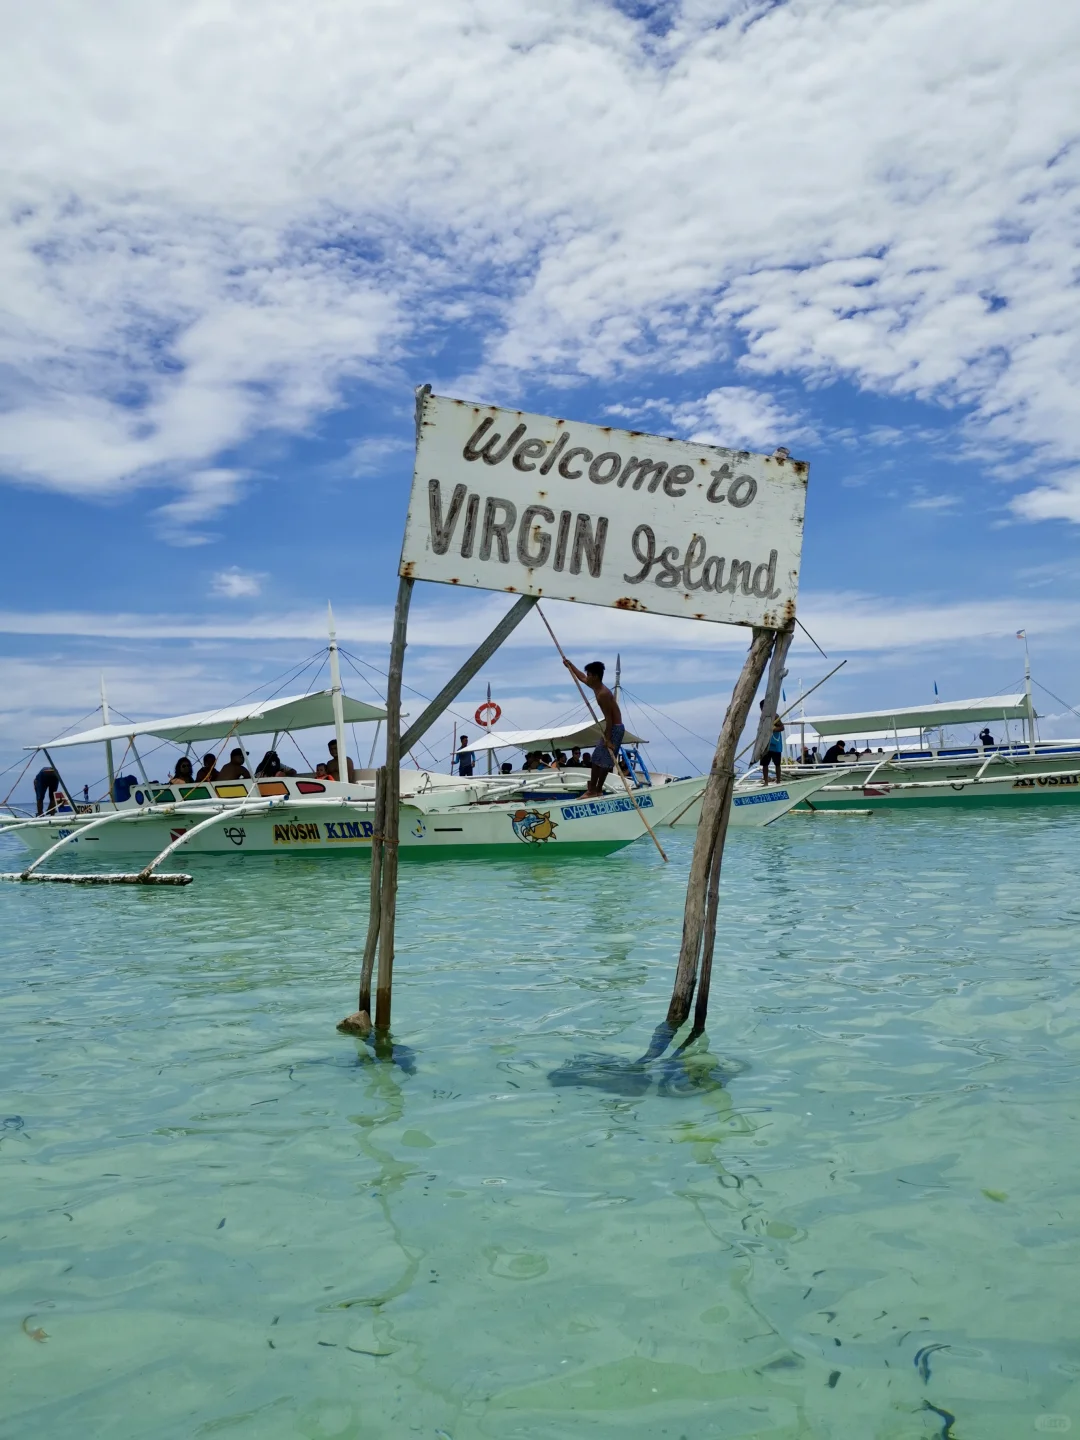 Cebu-I regret traveling to the Philippines so late, it turns out to be so much fun